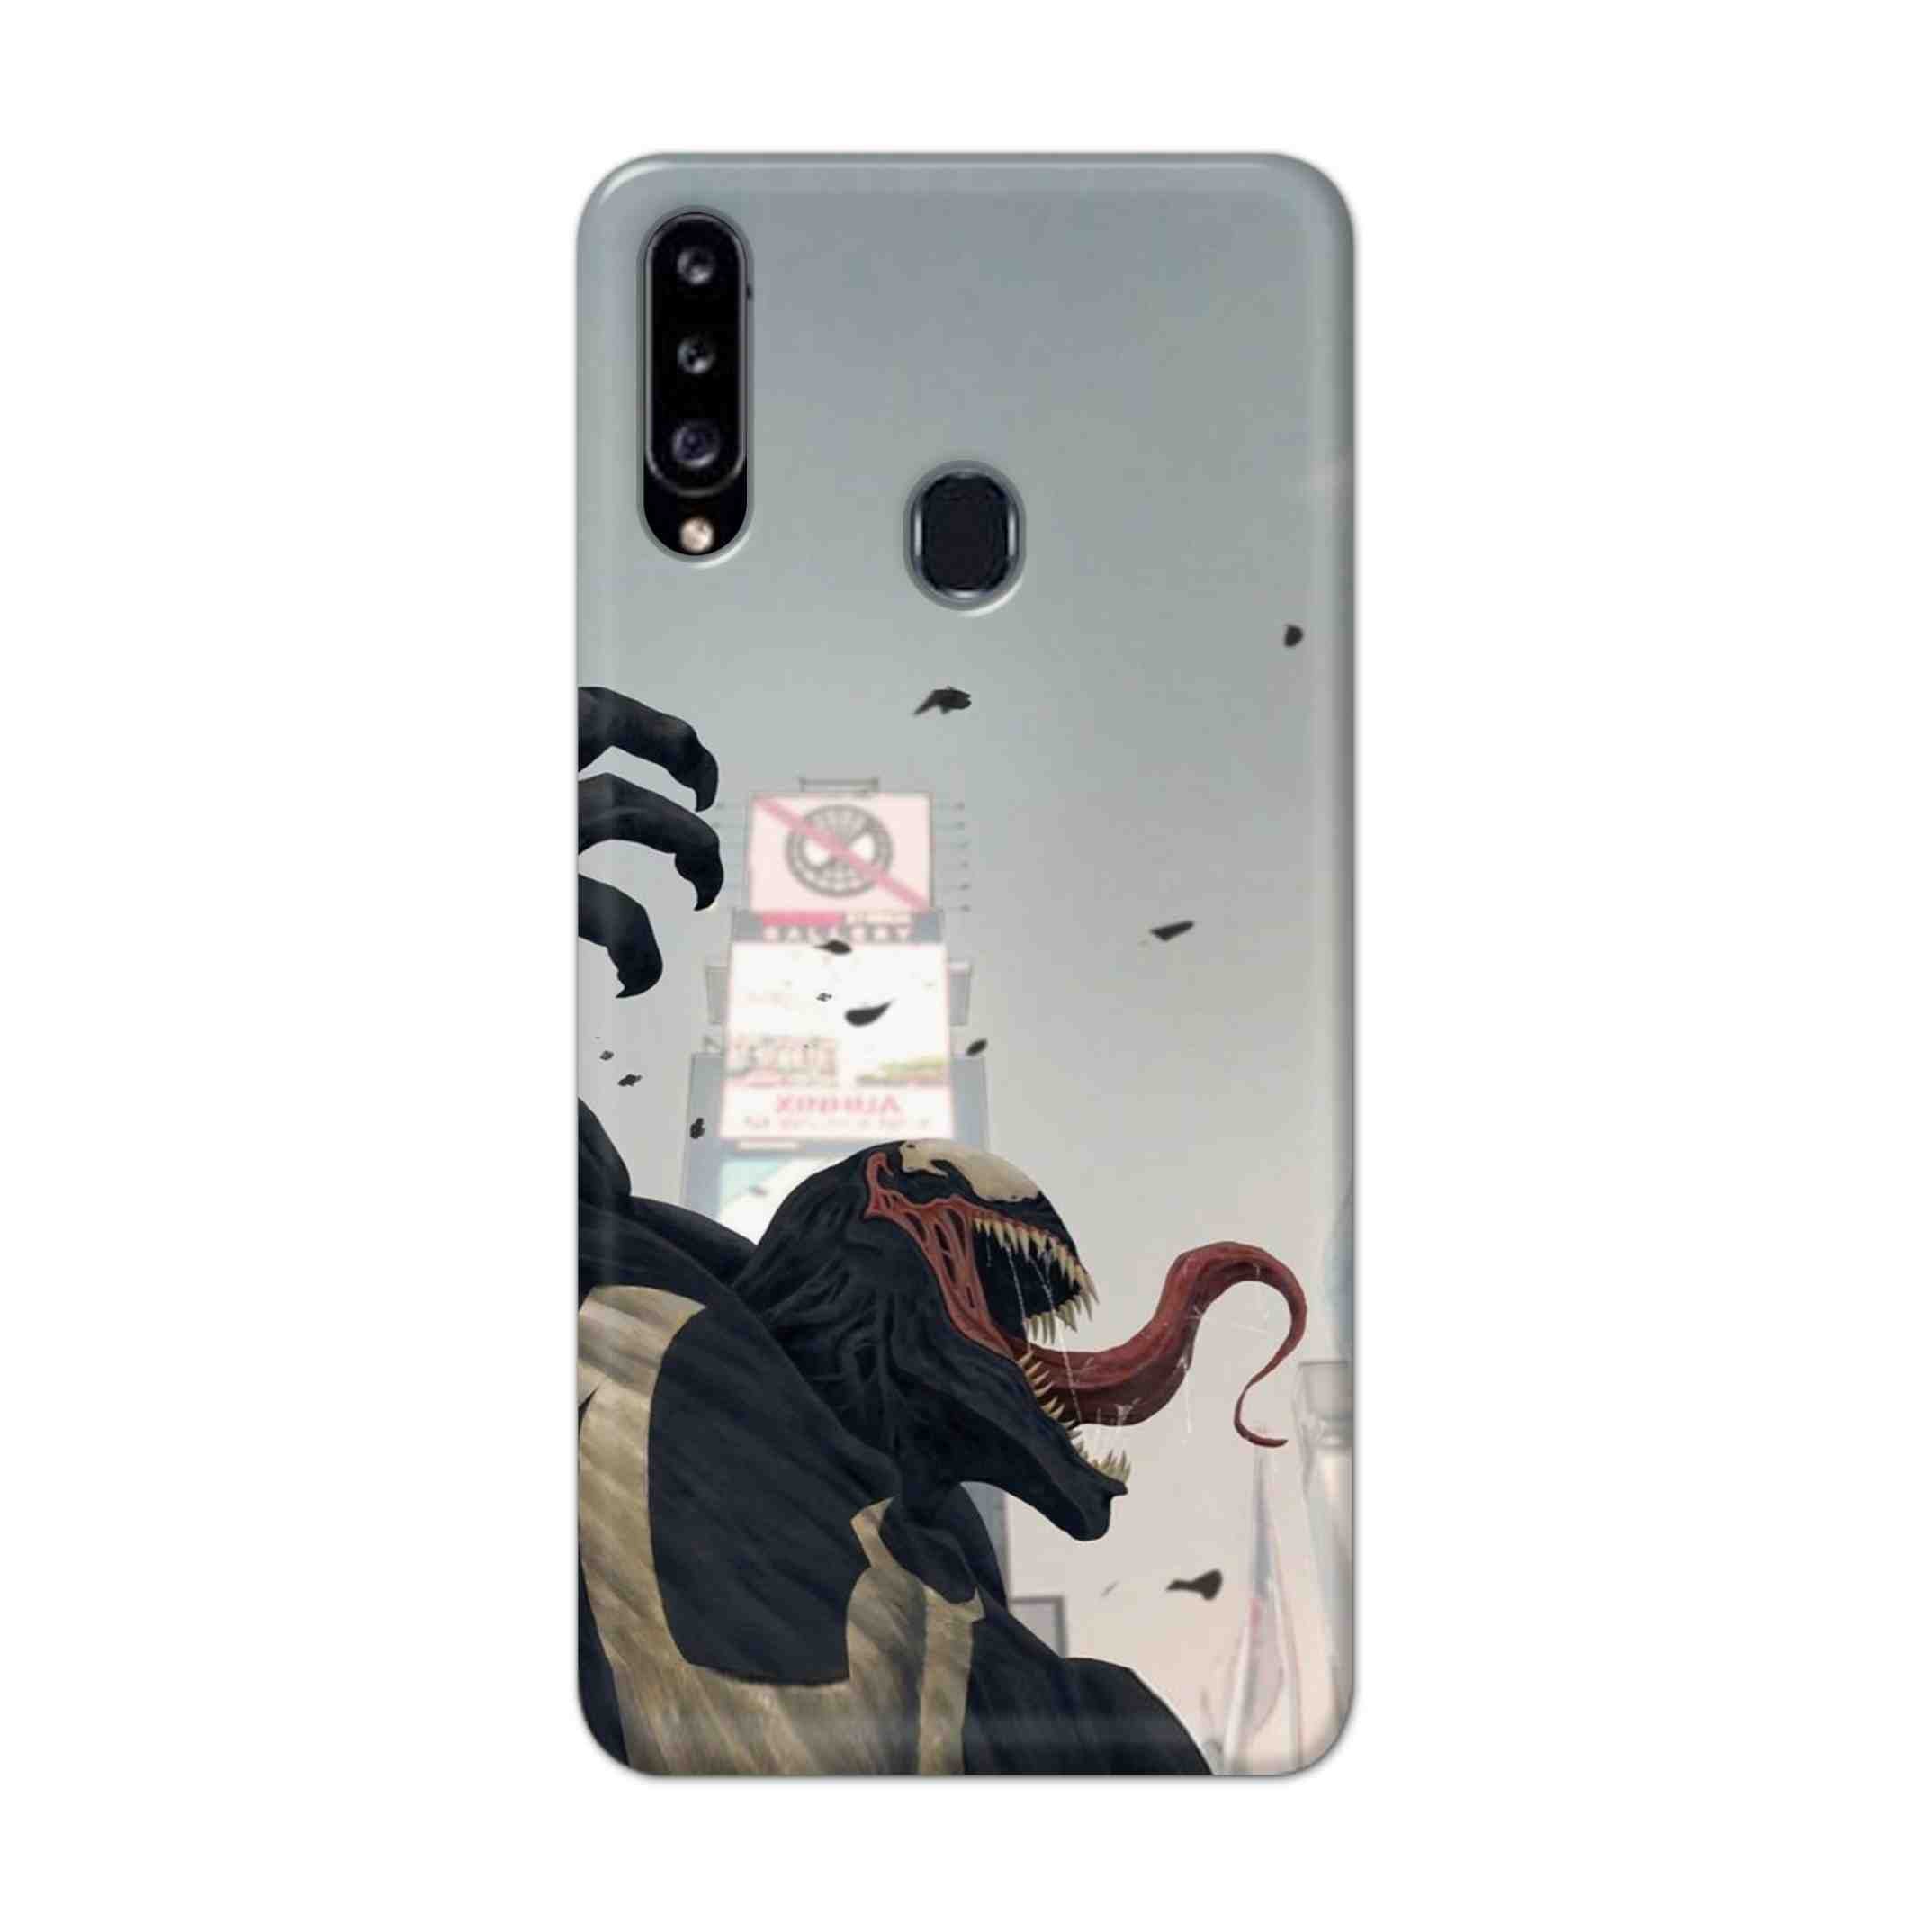 Buy Venom Crunch Hard Back Mobile Phone Case Cover For Samsung Galaxy A21 Online